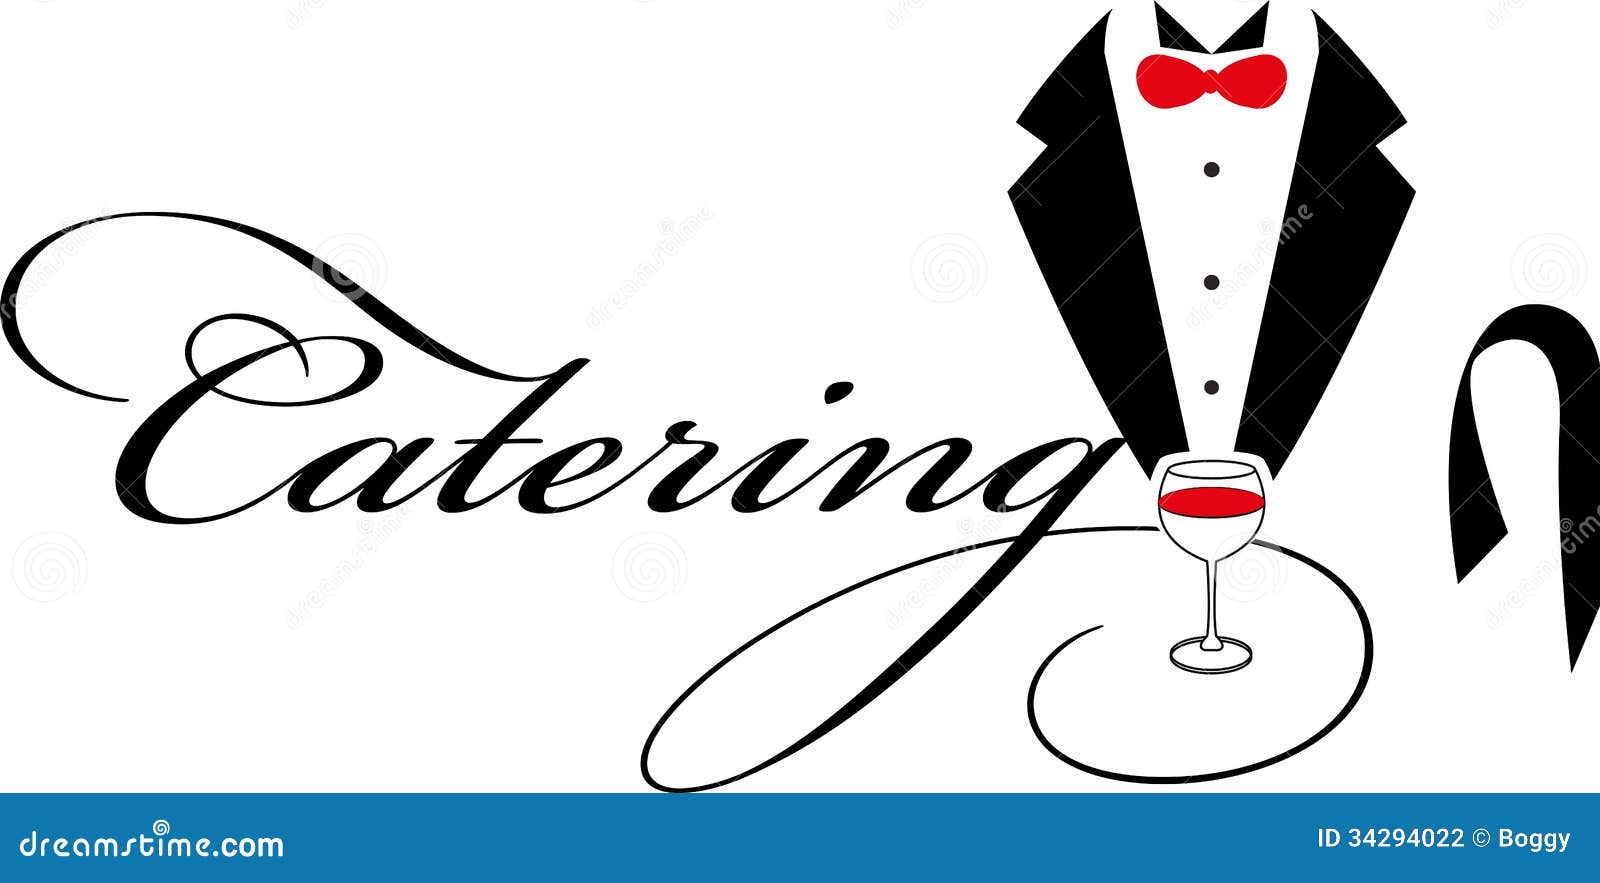 clipart catering - photo #10